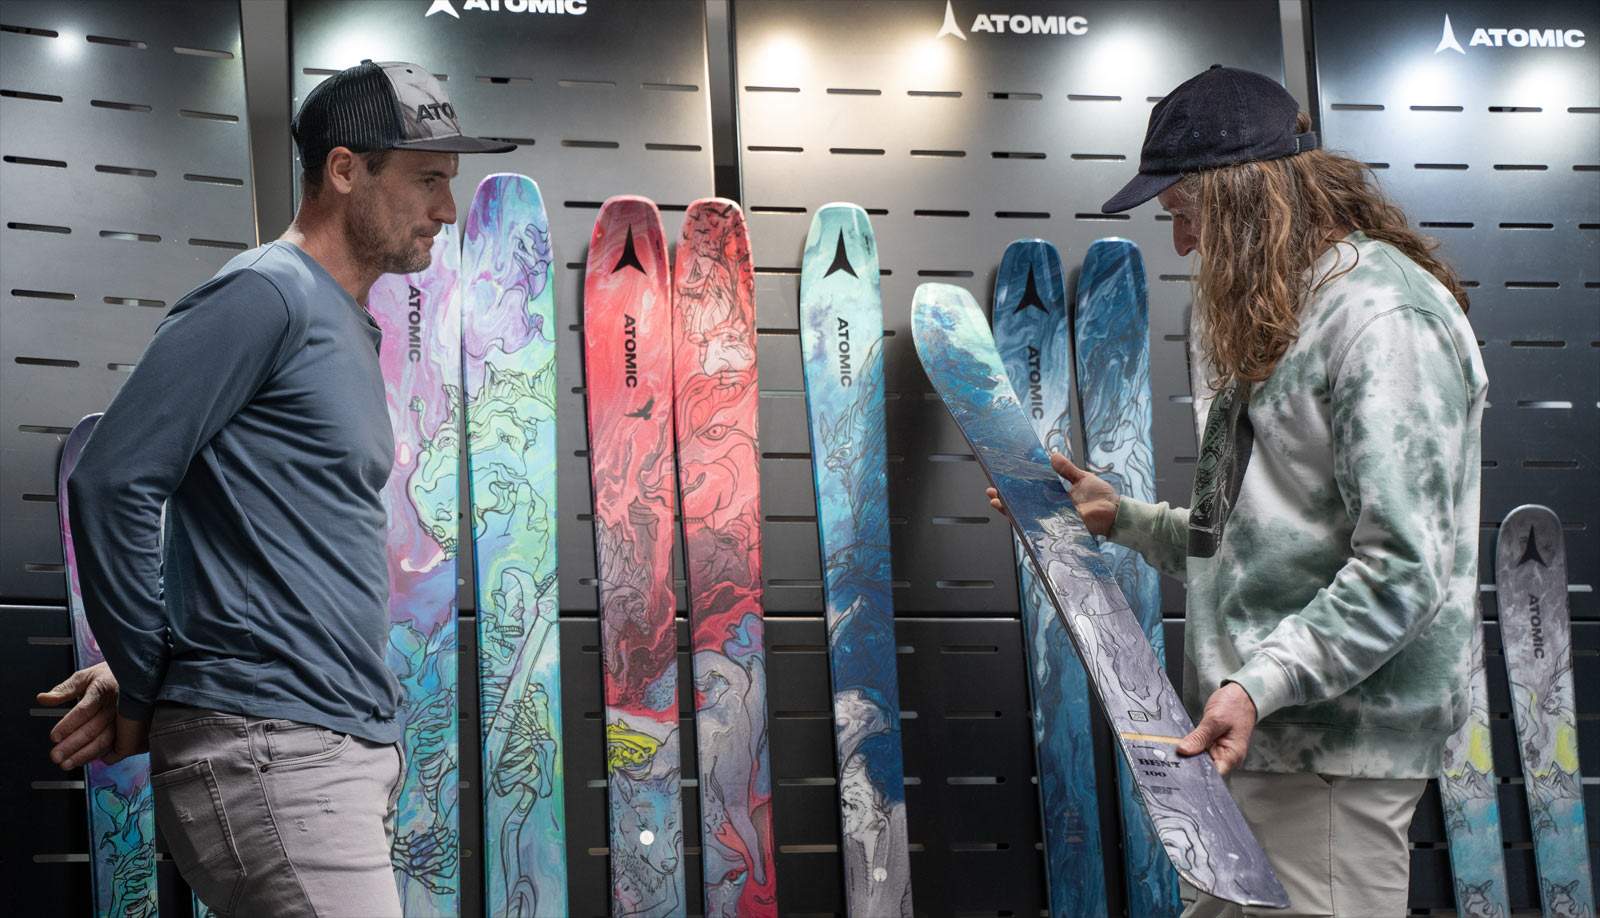 When skiing is a work of art: artist and freerider Chris Benchetler signs new Atomic skis